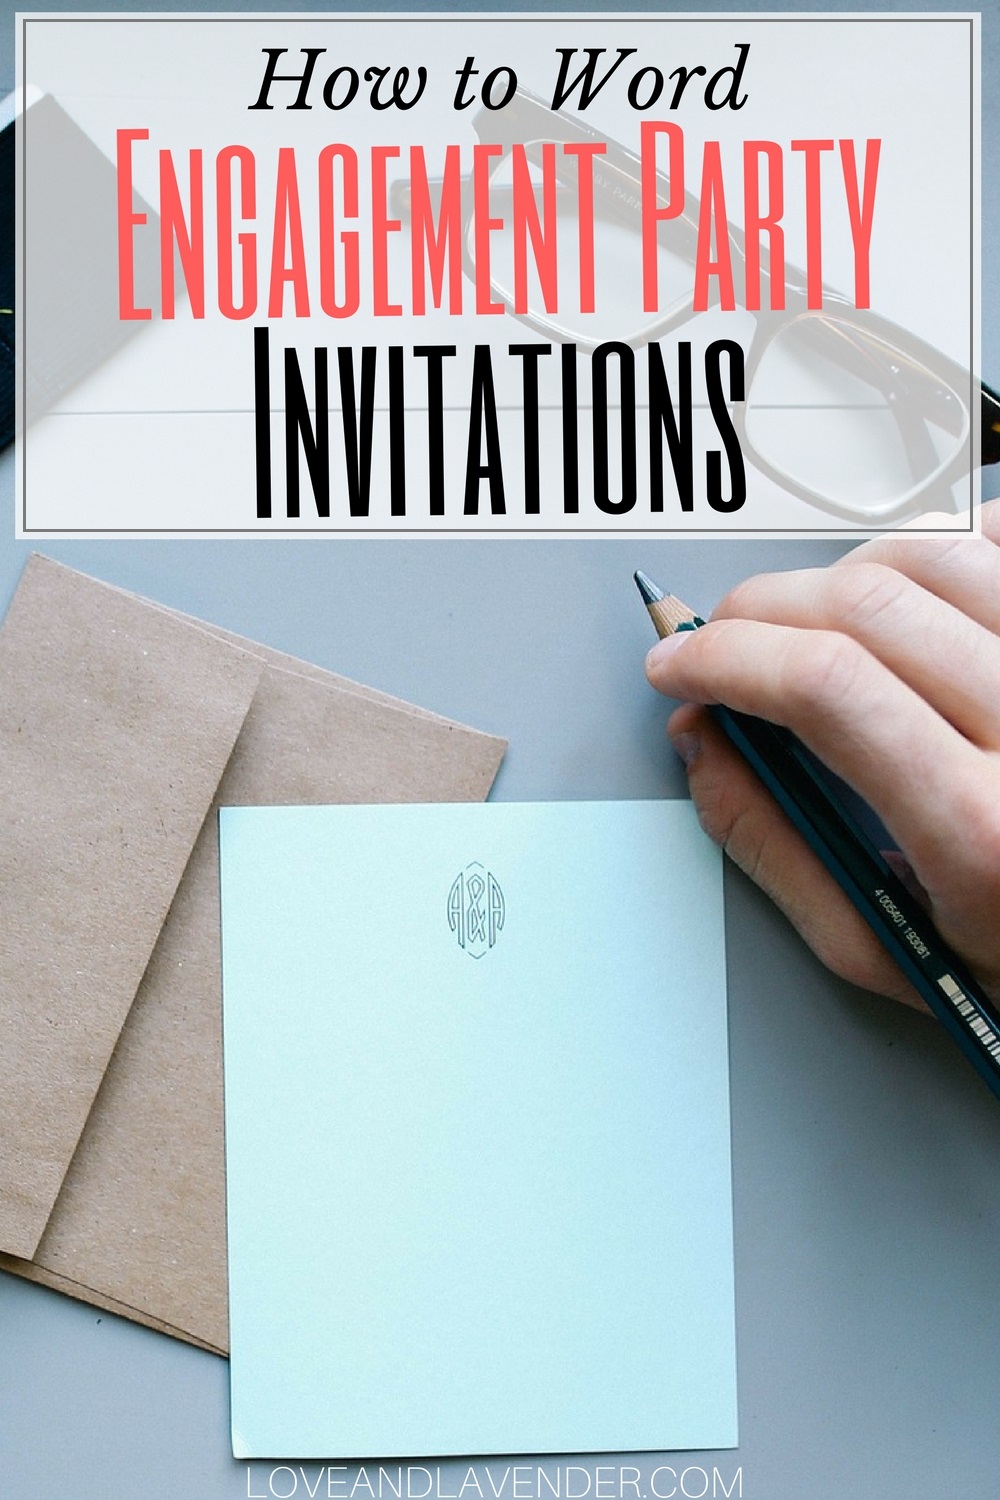 How to Word Engagement Party Invitations (with examples)